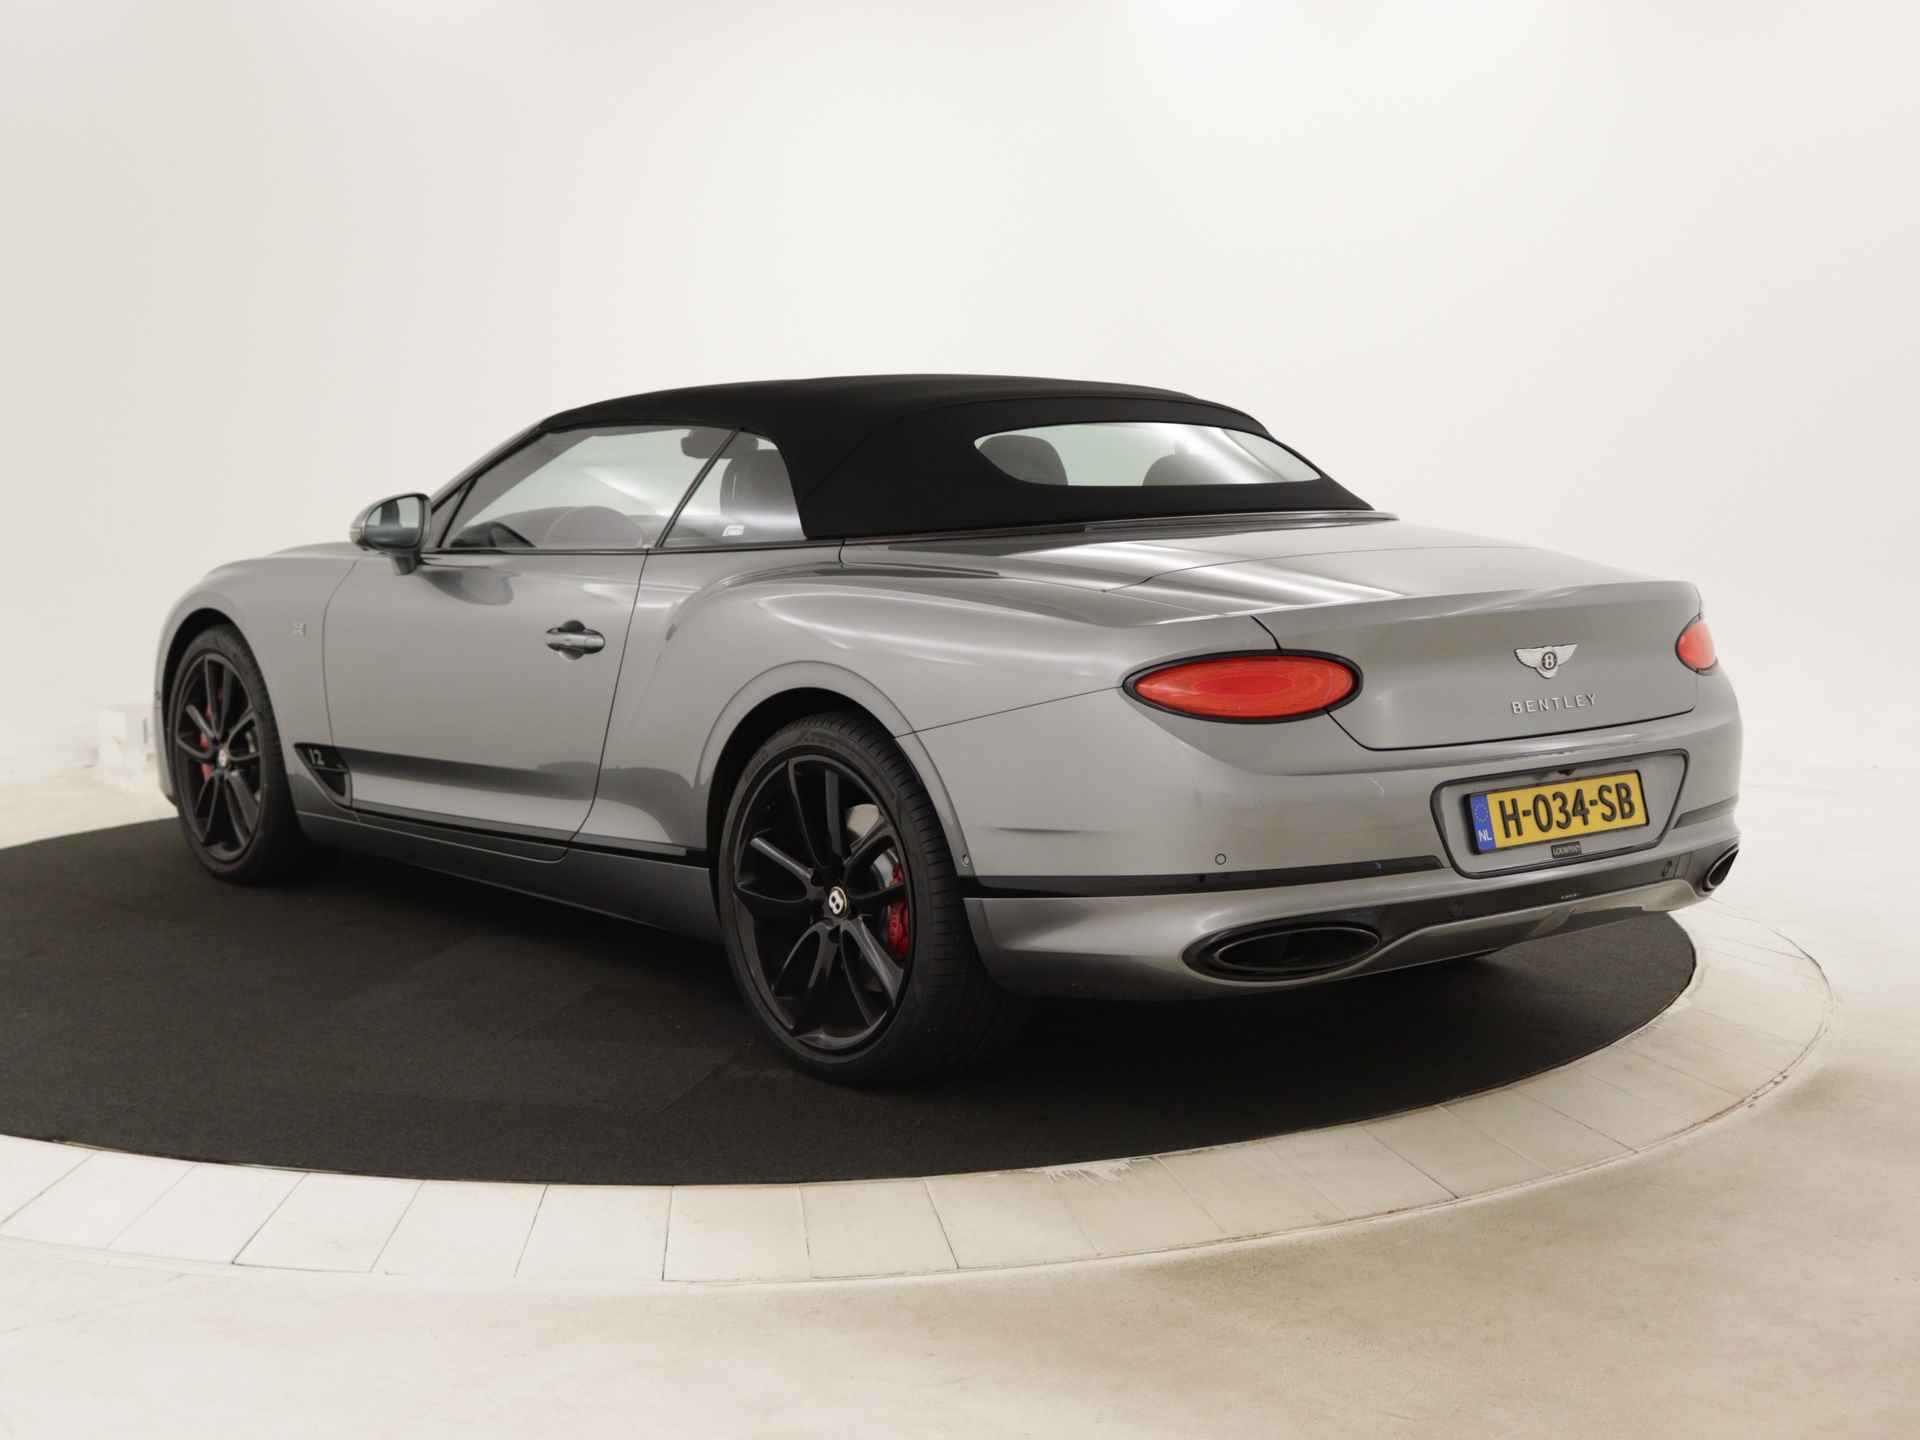 Bentley Continental GTC 6.0 W12 First Edition Mulliner - Bang & Olufsen - Black package - Massage seats - 42/46